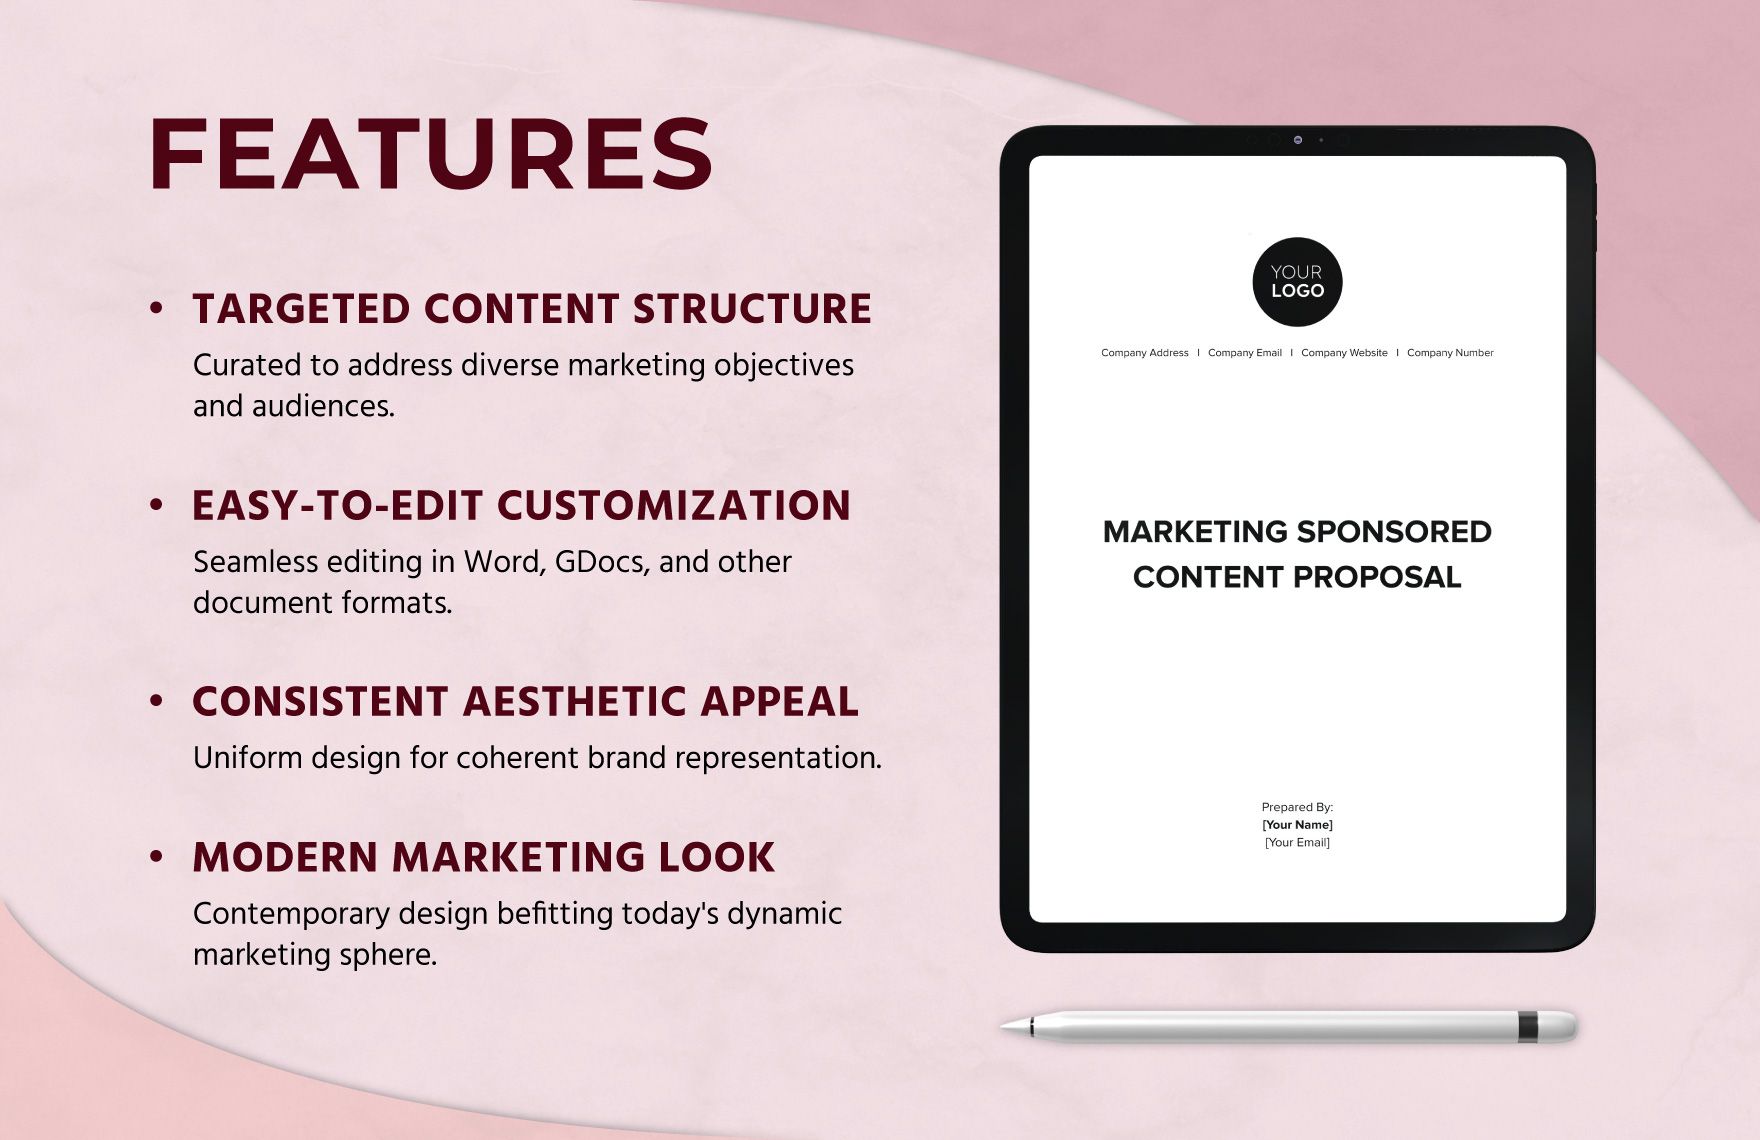 Marketing Sponsored Content Proposal Template